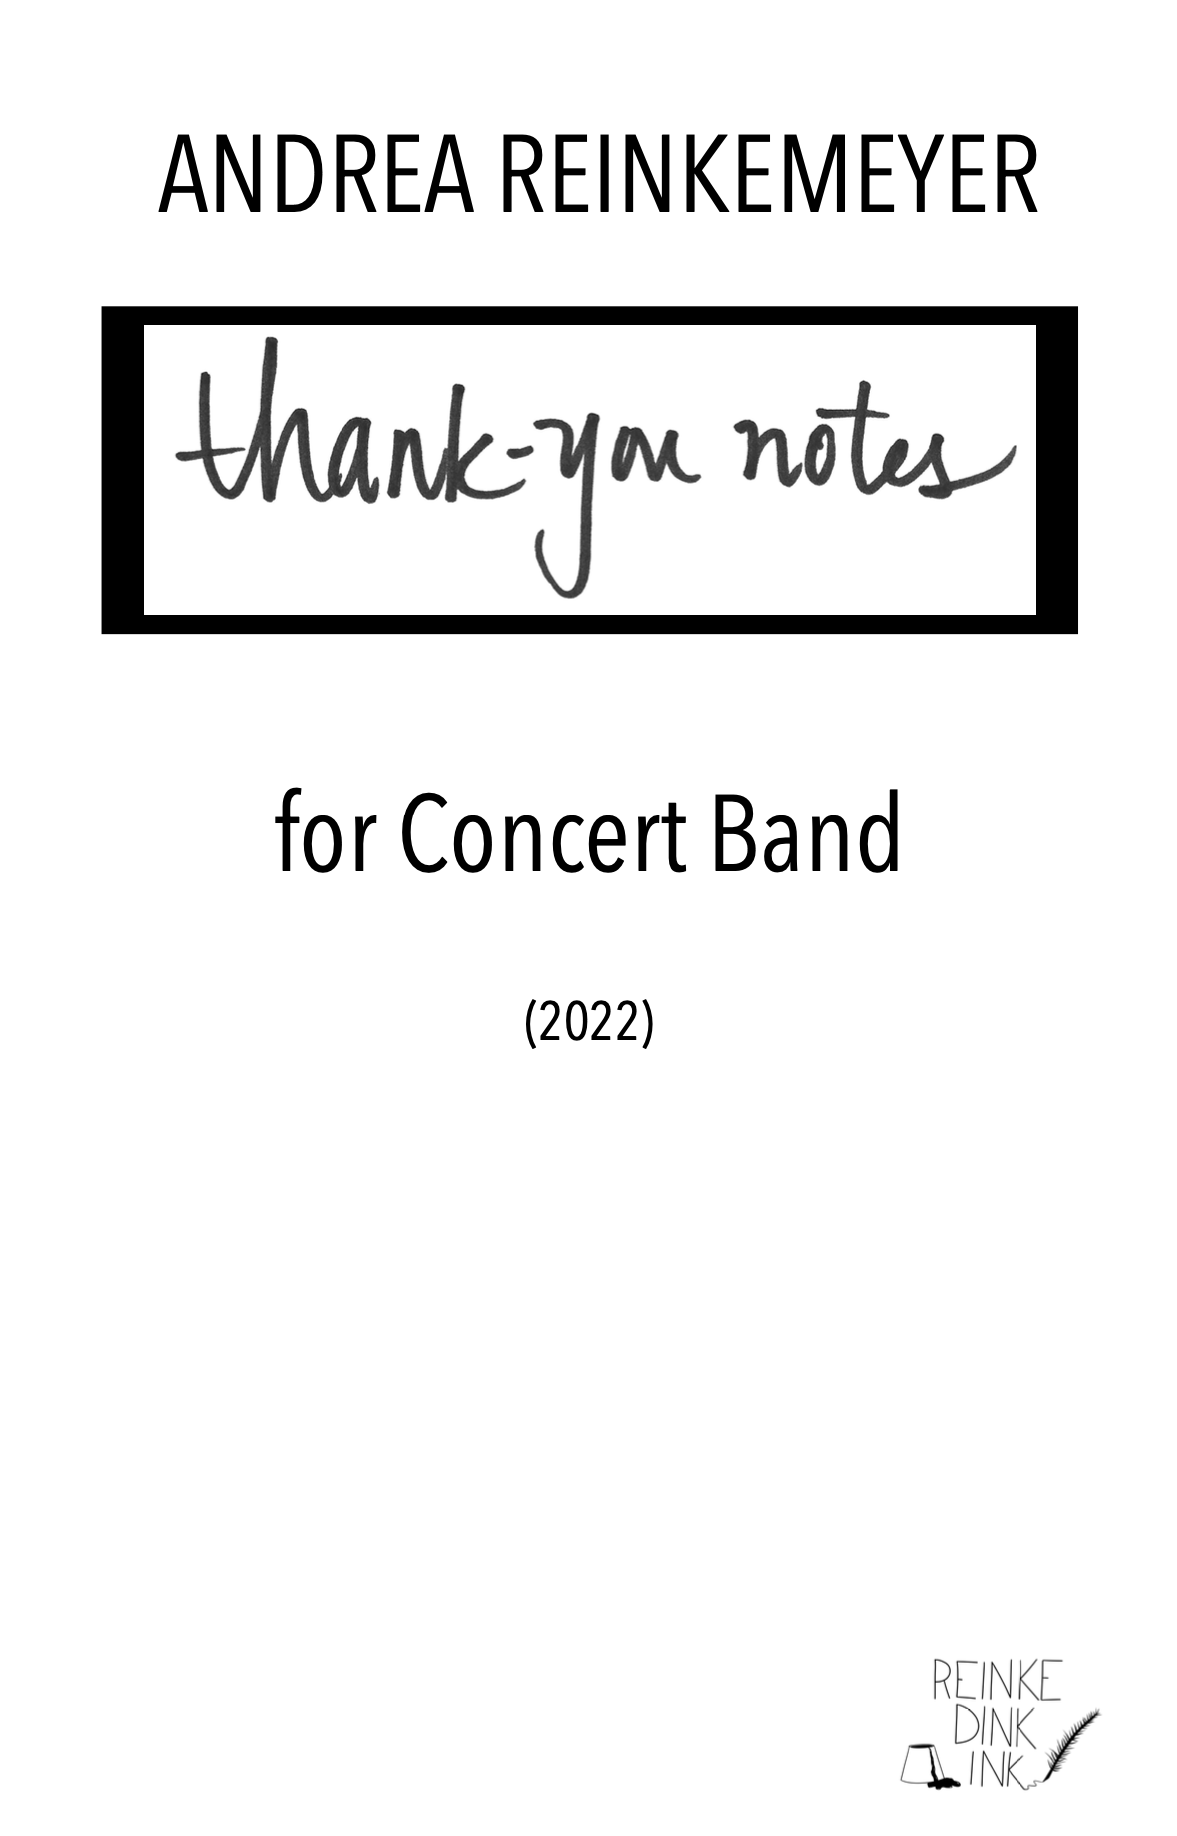 Thank-you Notes by Andrea Reinkemeyer